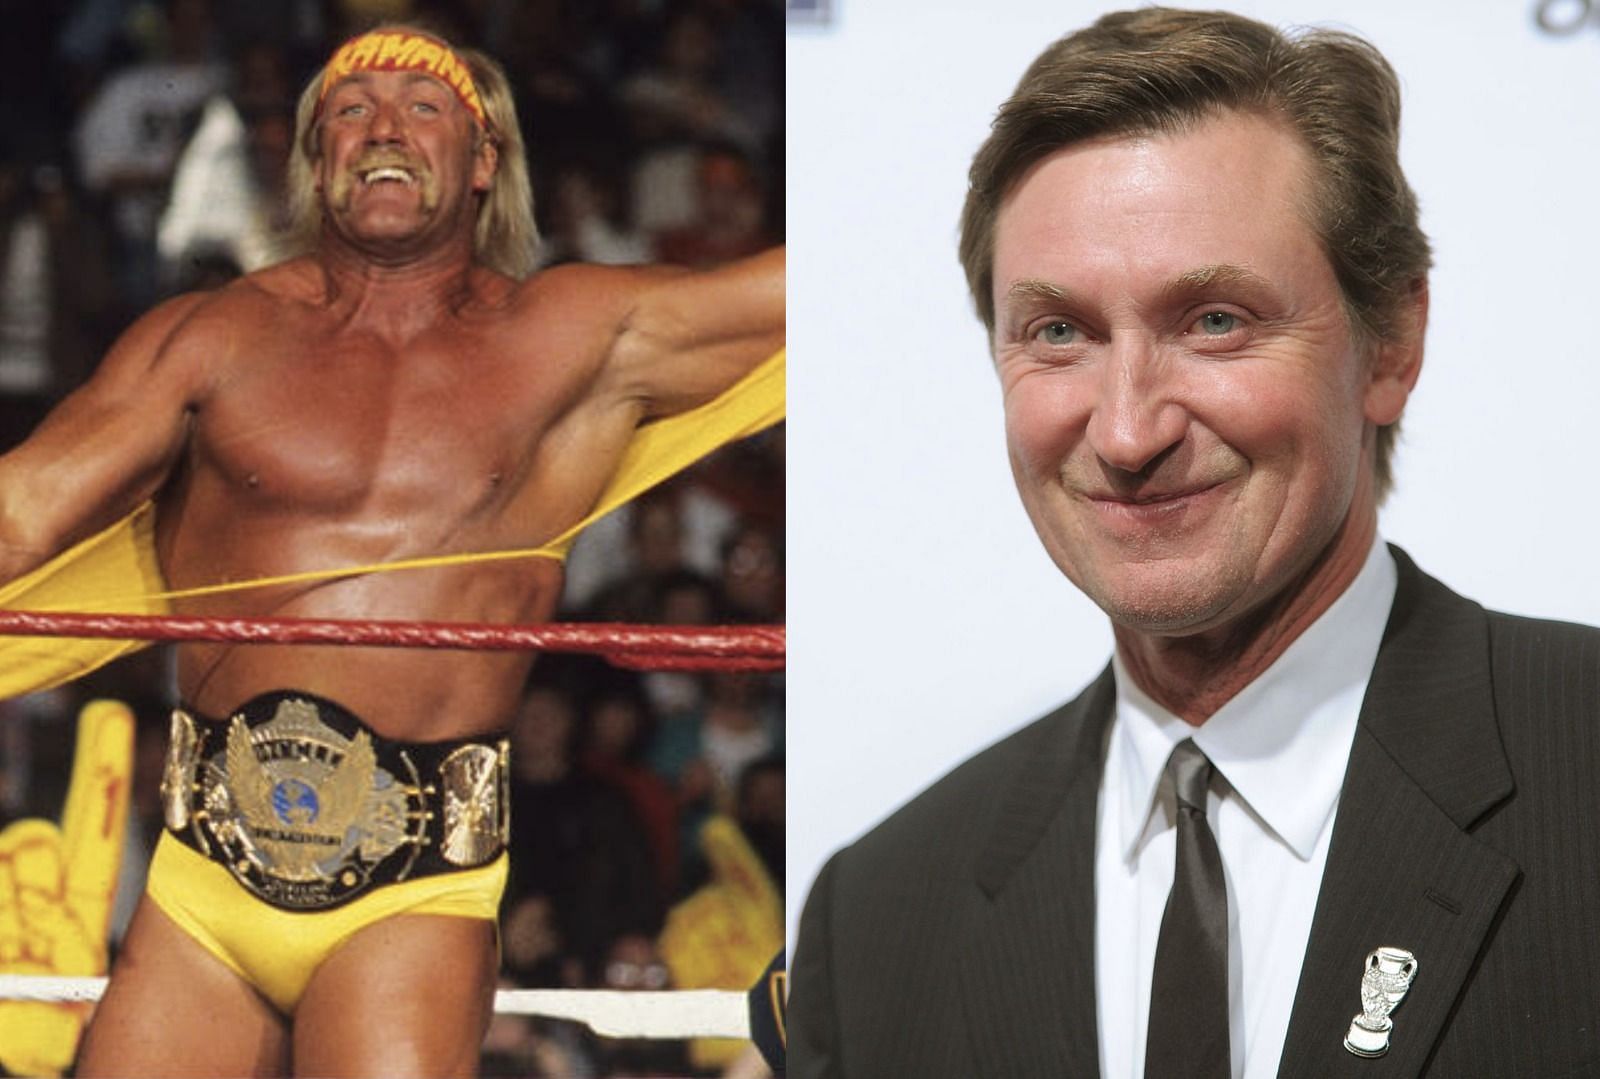 Wayne Gretzky reveals how he almost got into trouble with Hulk Hogan